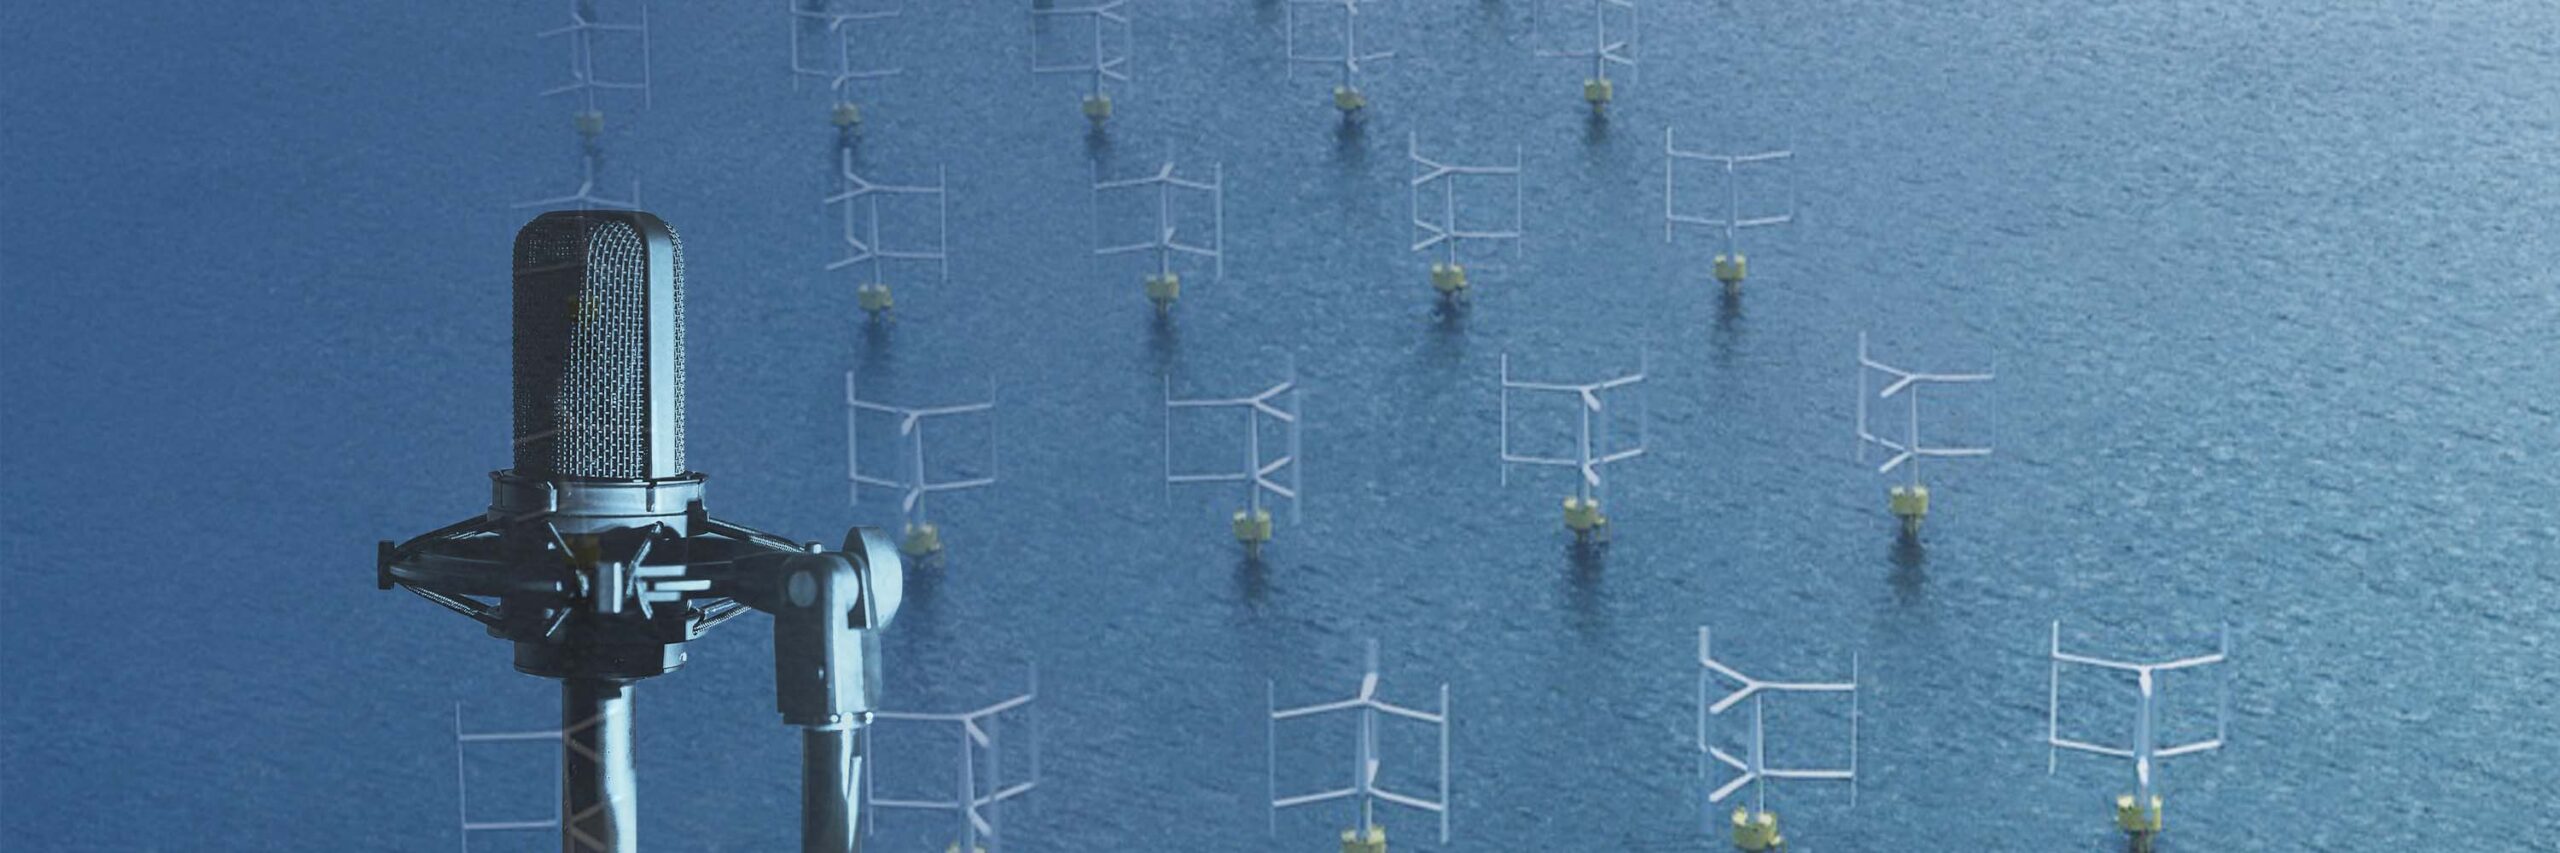 Energy Transition Now Podcast – Episode 28 “The Role of Floating Vertical-Axis Wind Turbines”